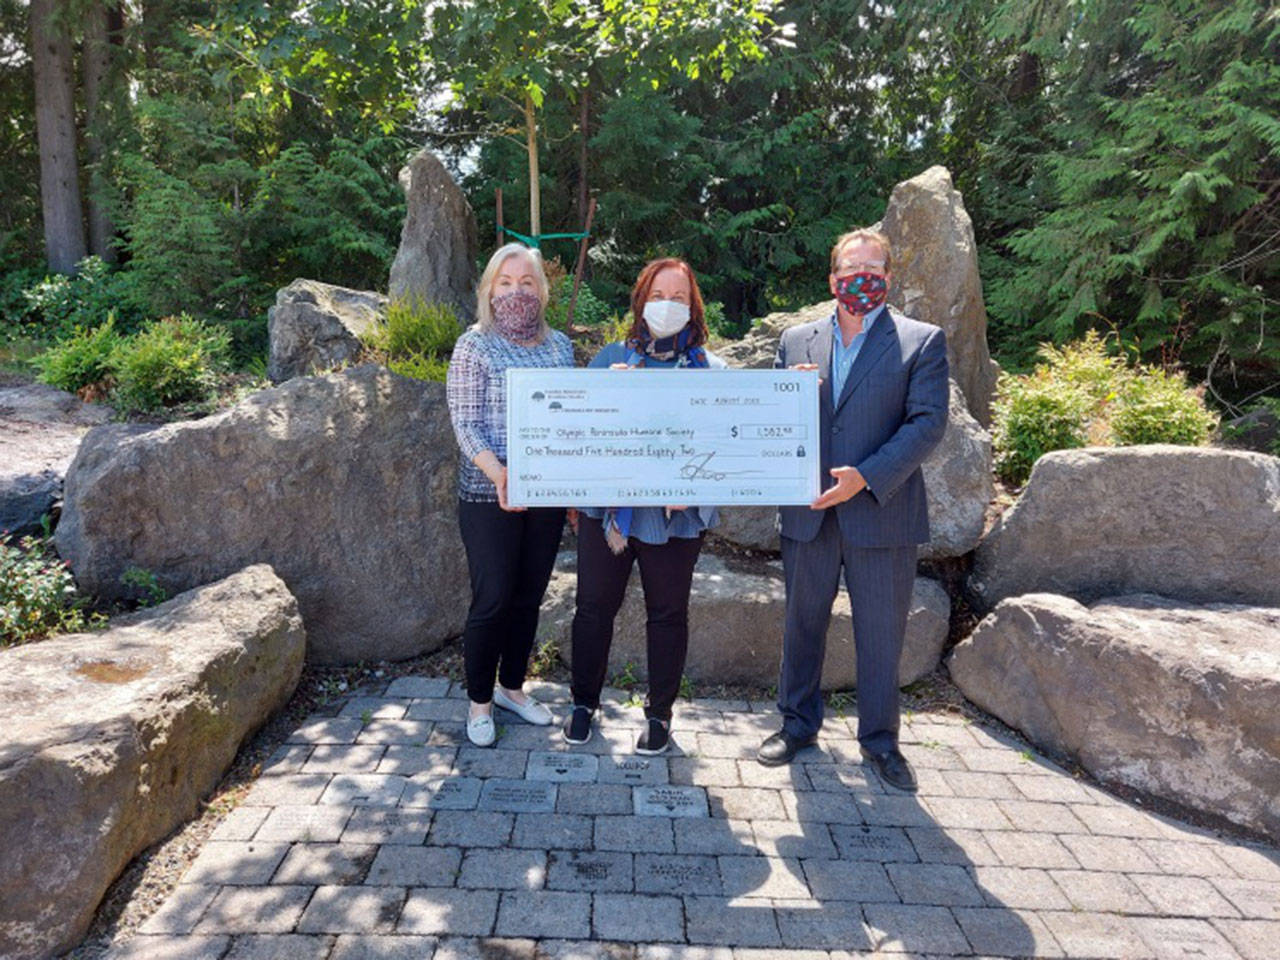 Celebrating a donation from Harper-Ridgeview and Peninsula Pet Cremation to the Olympic Peninsula Humane Society (OPHS) are, from left, OPHS development manager Jaquelene Petersen, OPHS executive director Luanne Hinkle and Mark Gustafson, general manager at Harper-Ridgeview and Peninsula Pet Cremation. Submitted photo